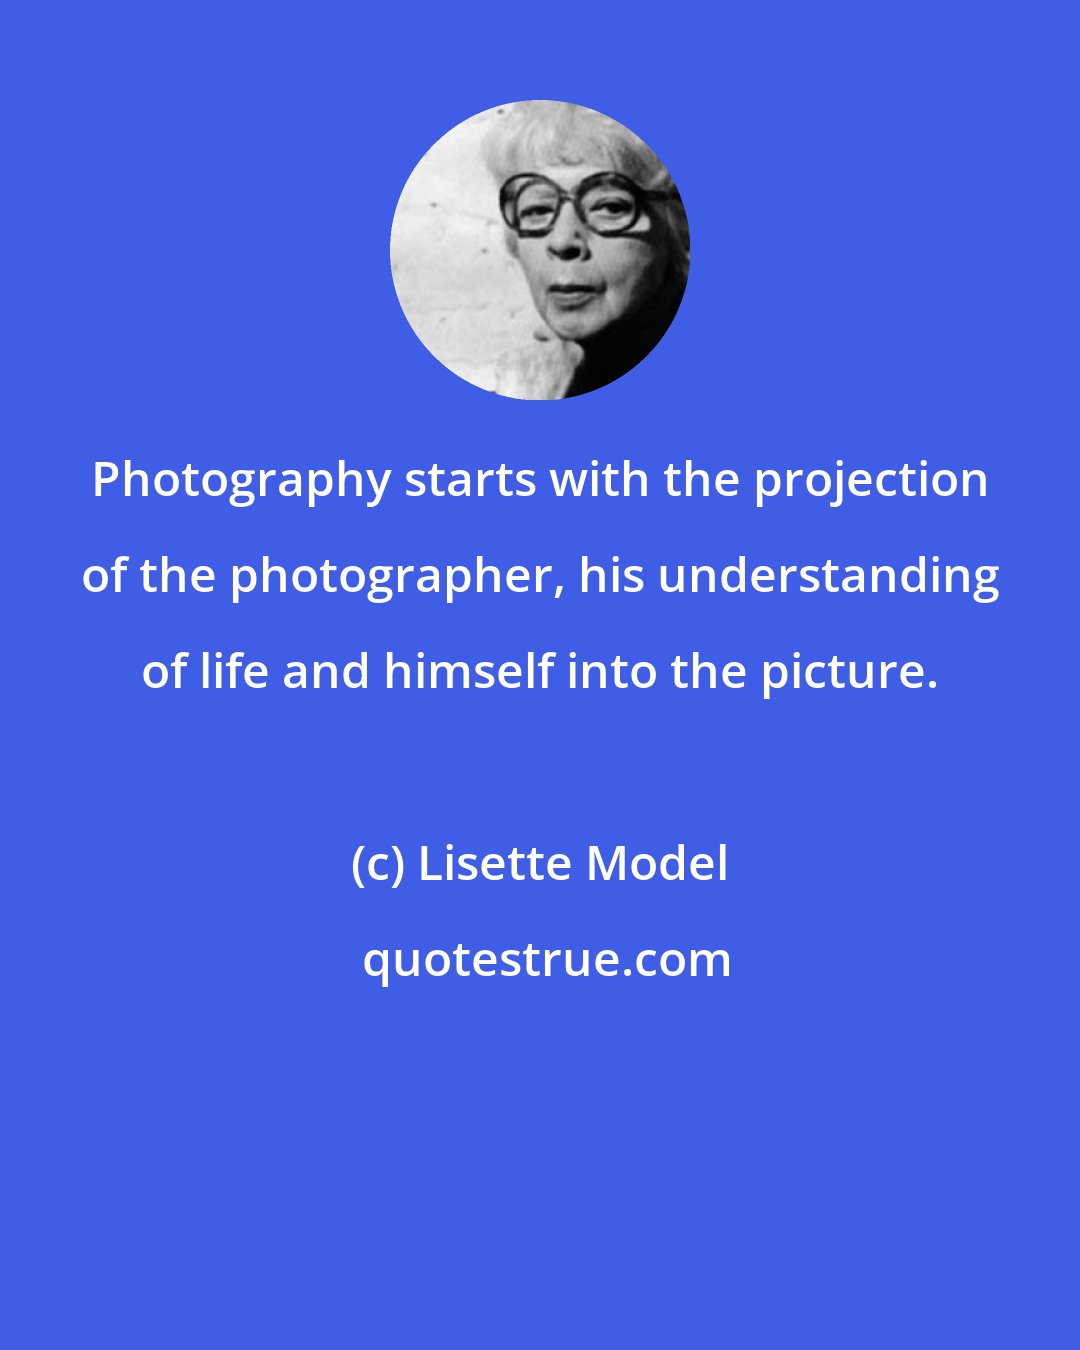 Lisette Model: Photography starts with the projection of the photographer, his understanding of life and himself into the picture.